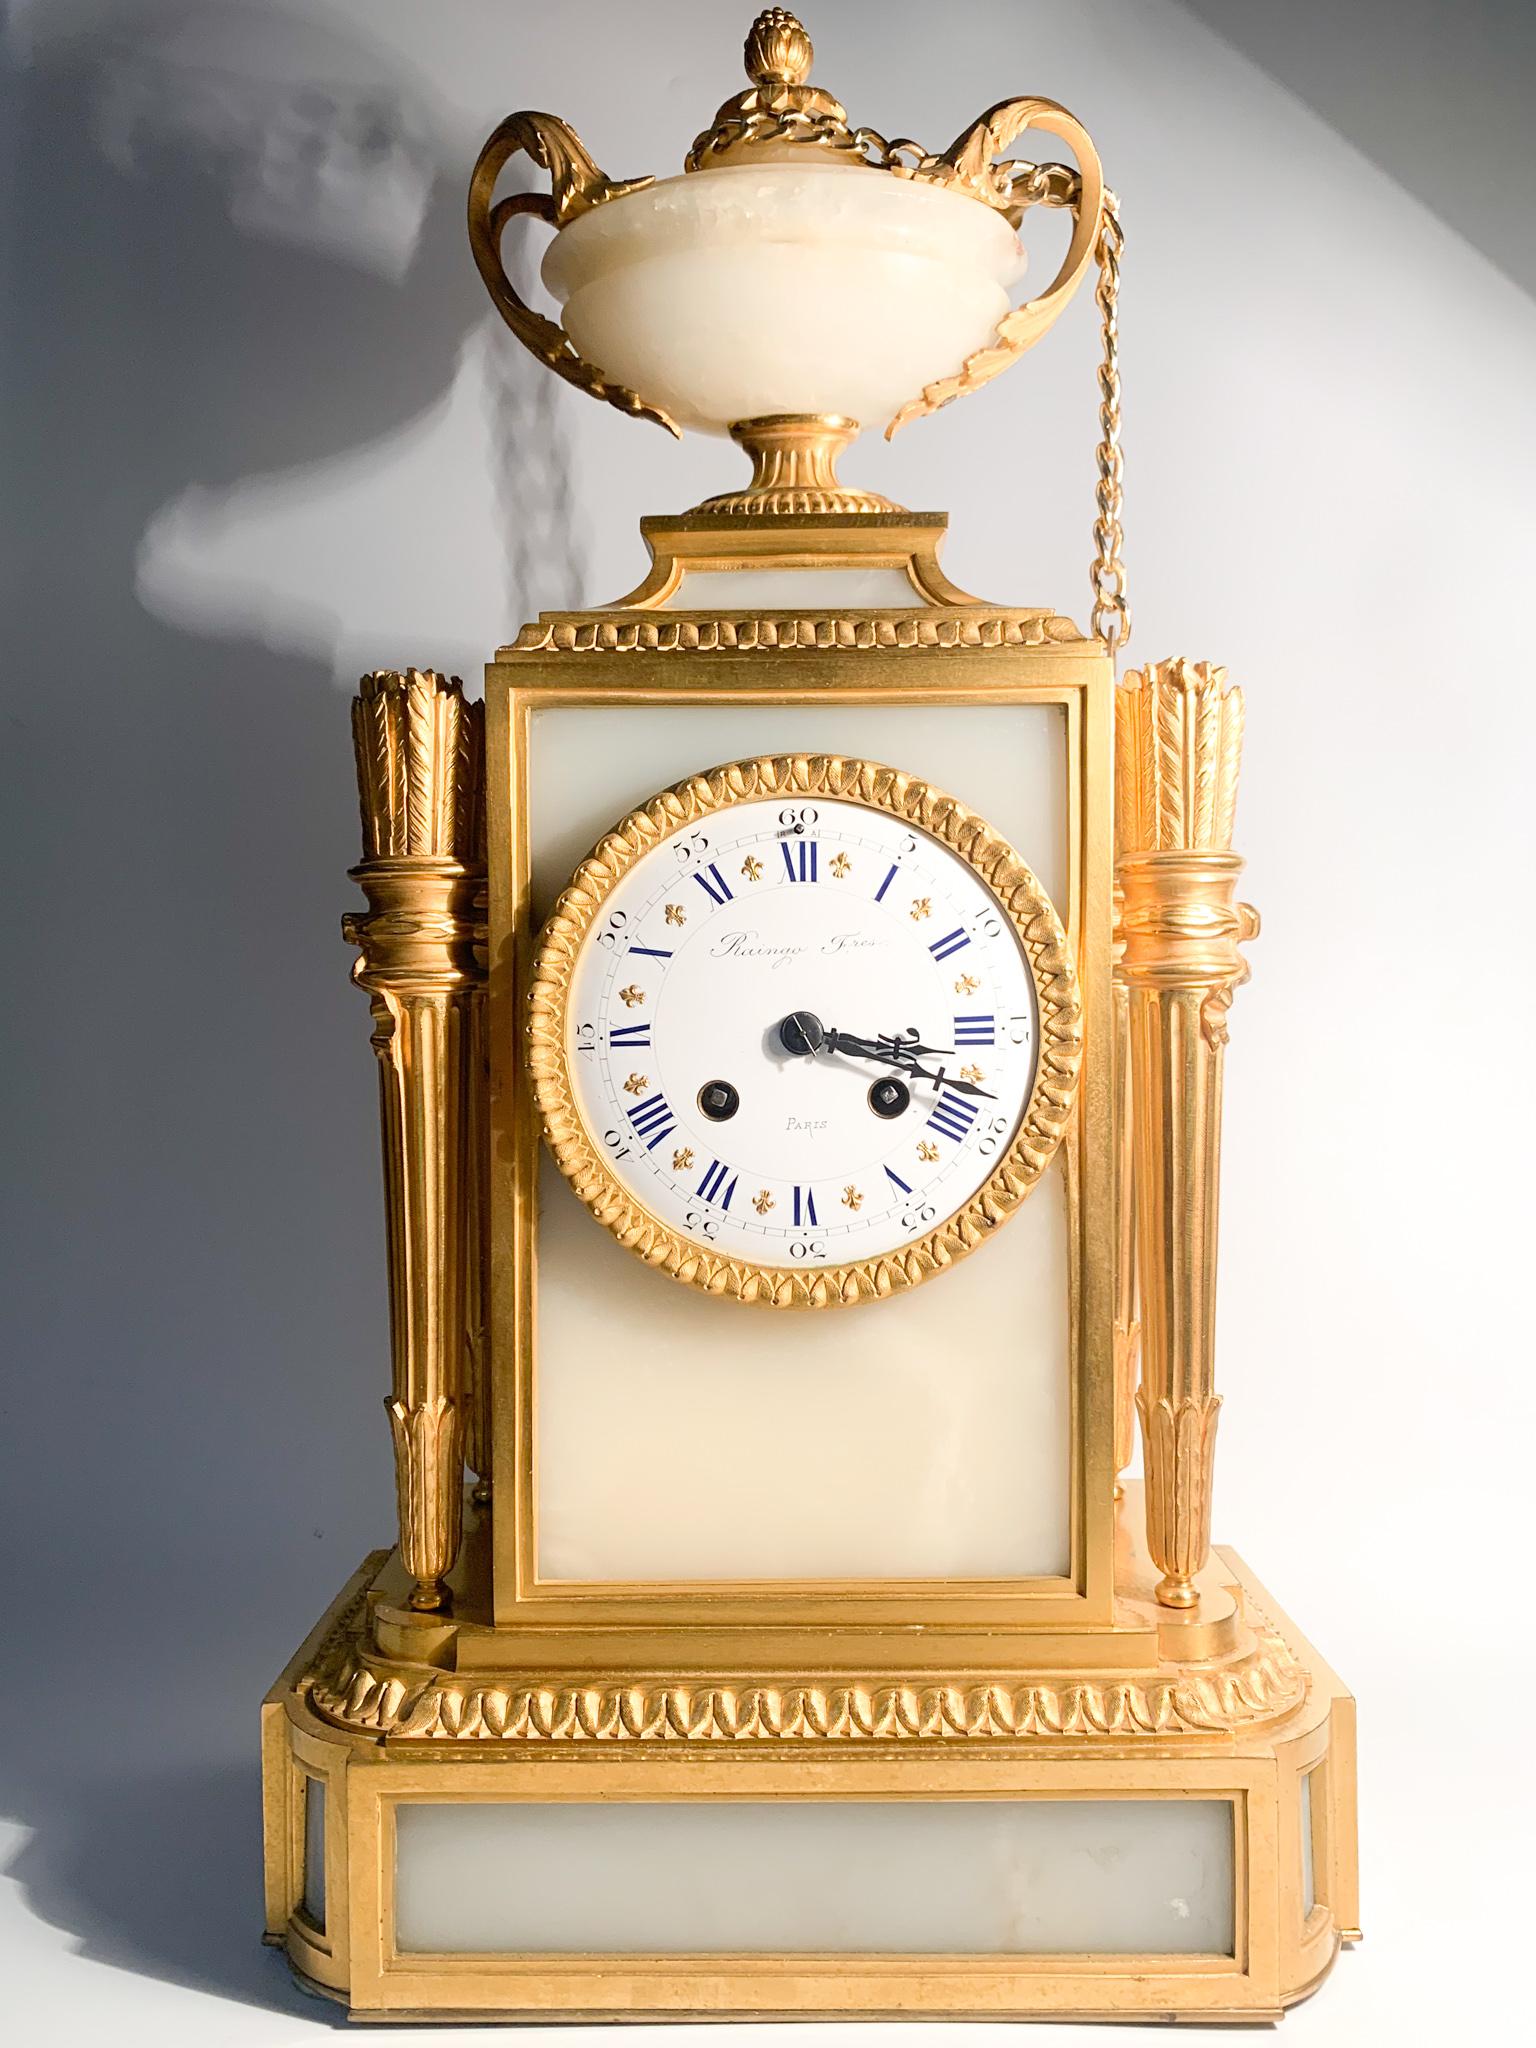 French Louis XVI style table clock in alabaster and gilded bronze, made by Raingo Frères Paris in 1800

Measures: Ø cm 24 Ø cm 14 h cm 46.